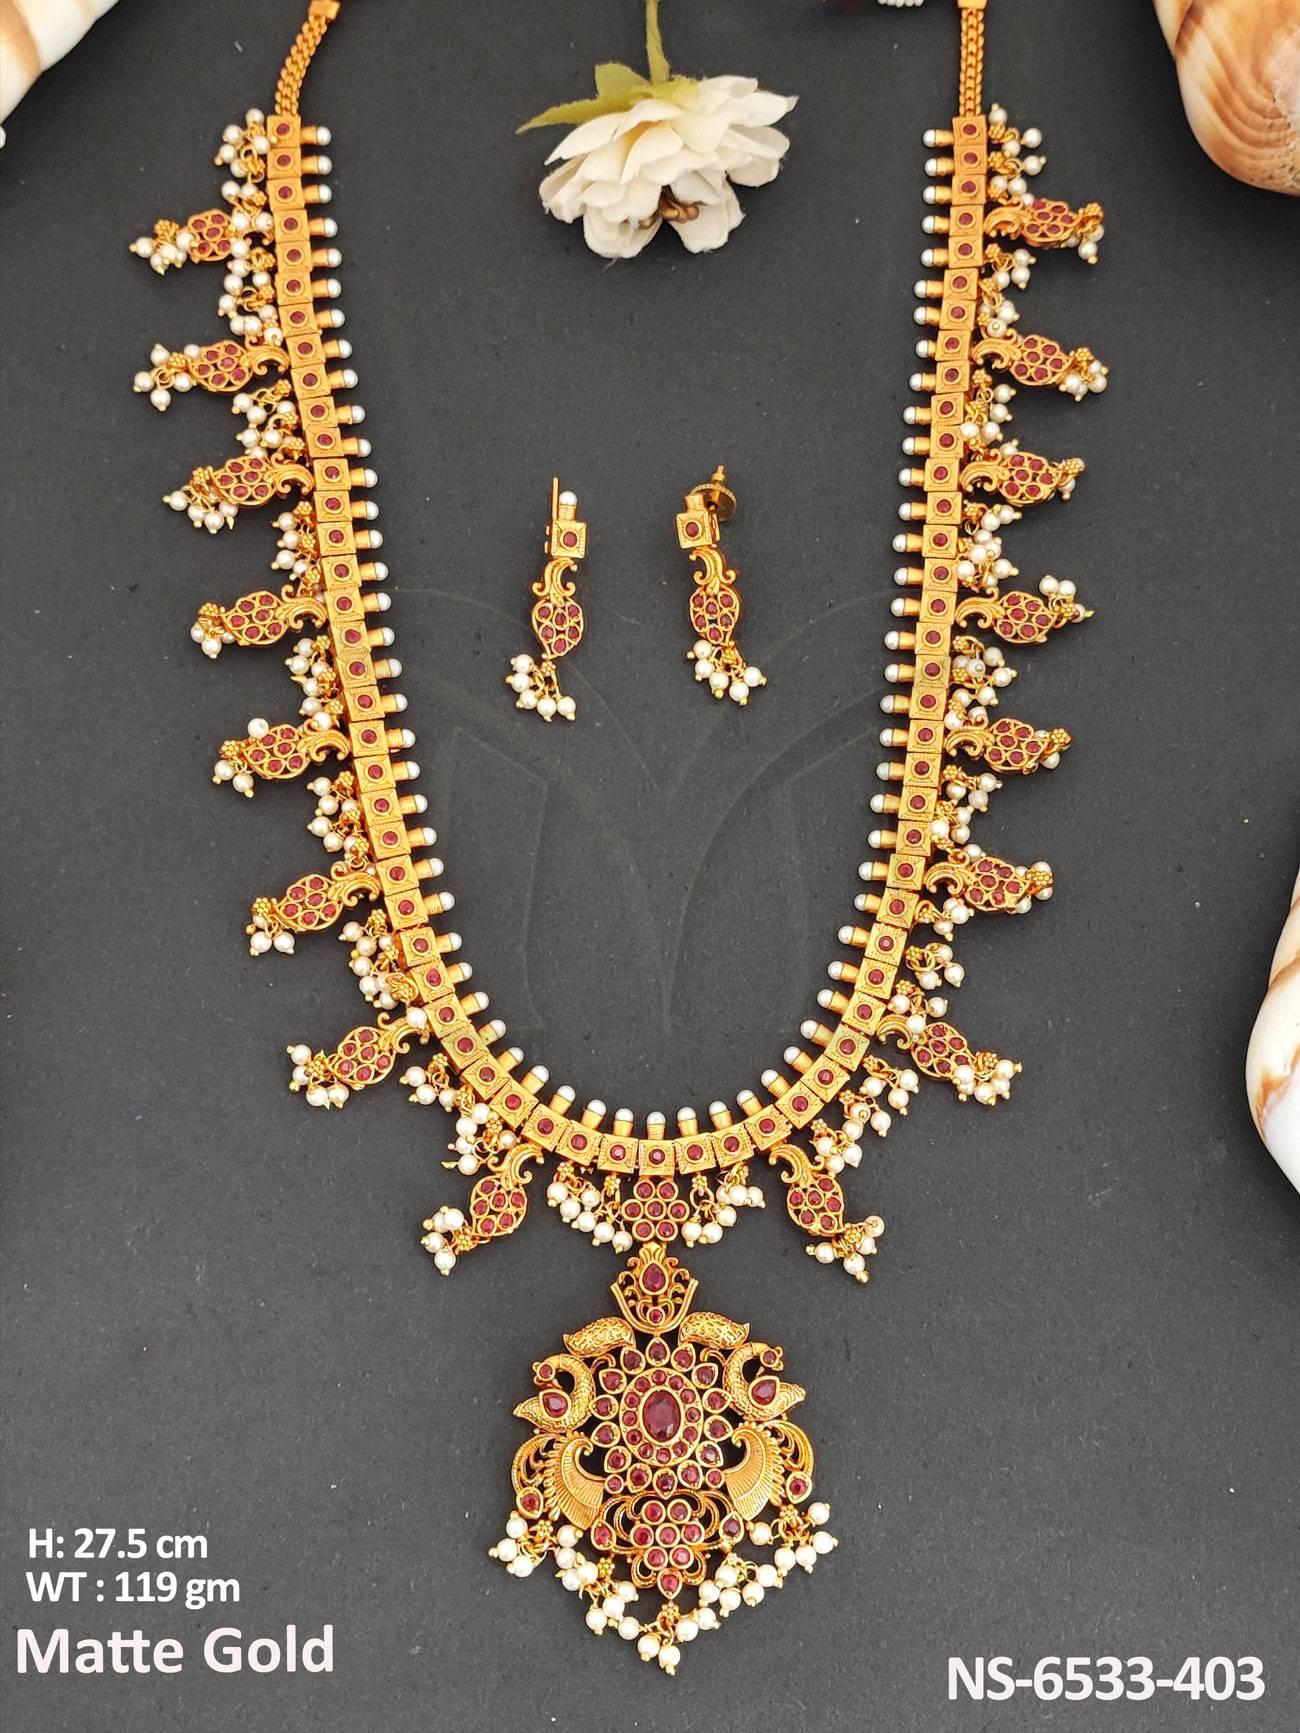 This necklace set is made from the finest materials and crafted with intricate detail to create a unique look that celebrates traditional and modern styles.